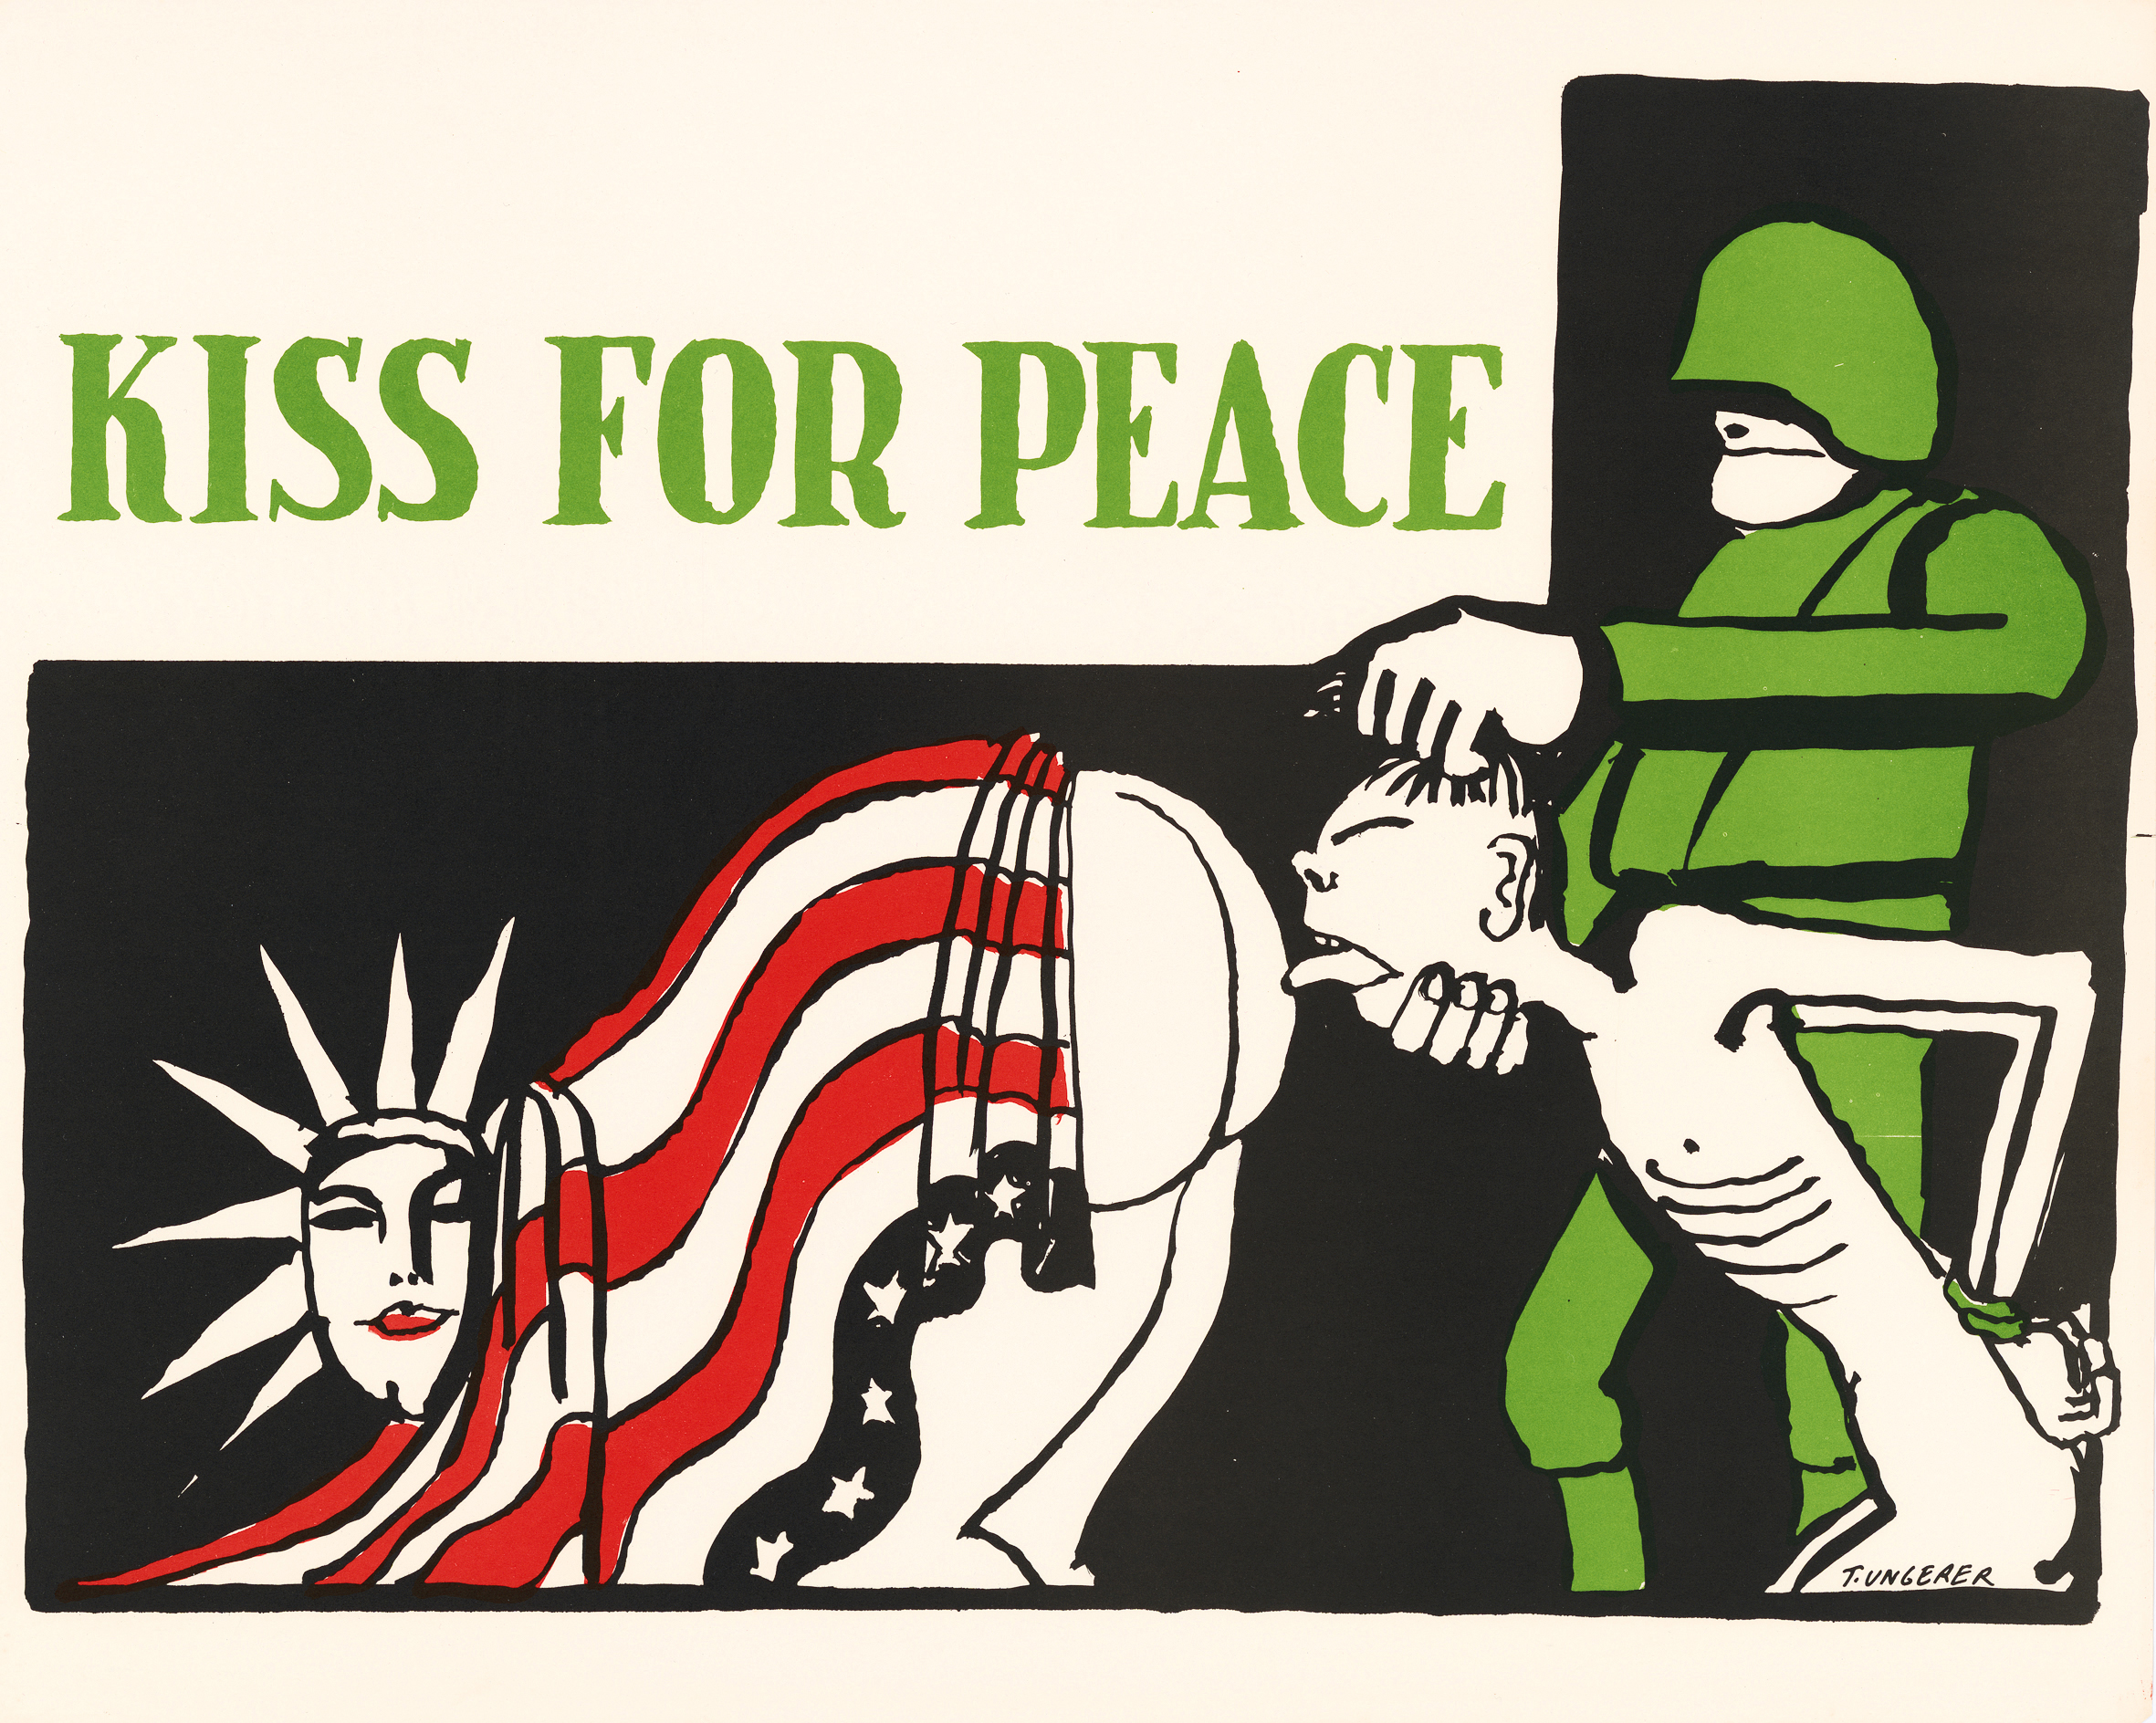 Meet The Illustrator Who Drew Kids’ Books, Anti-War Posters And Erotica